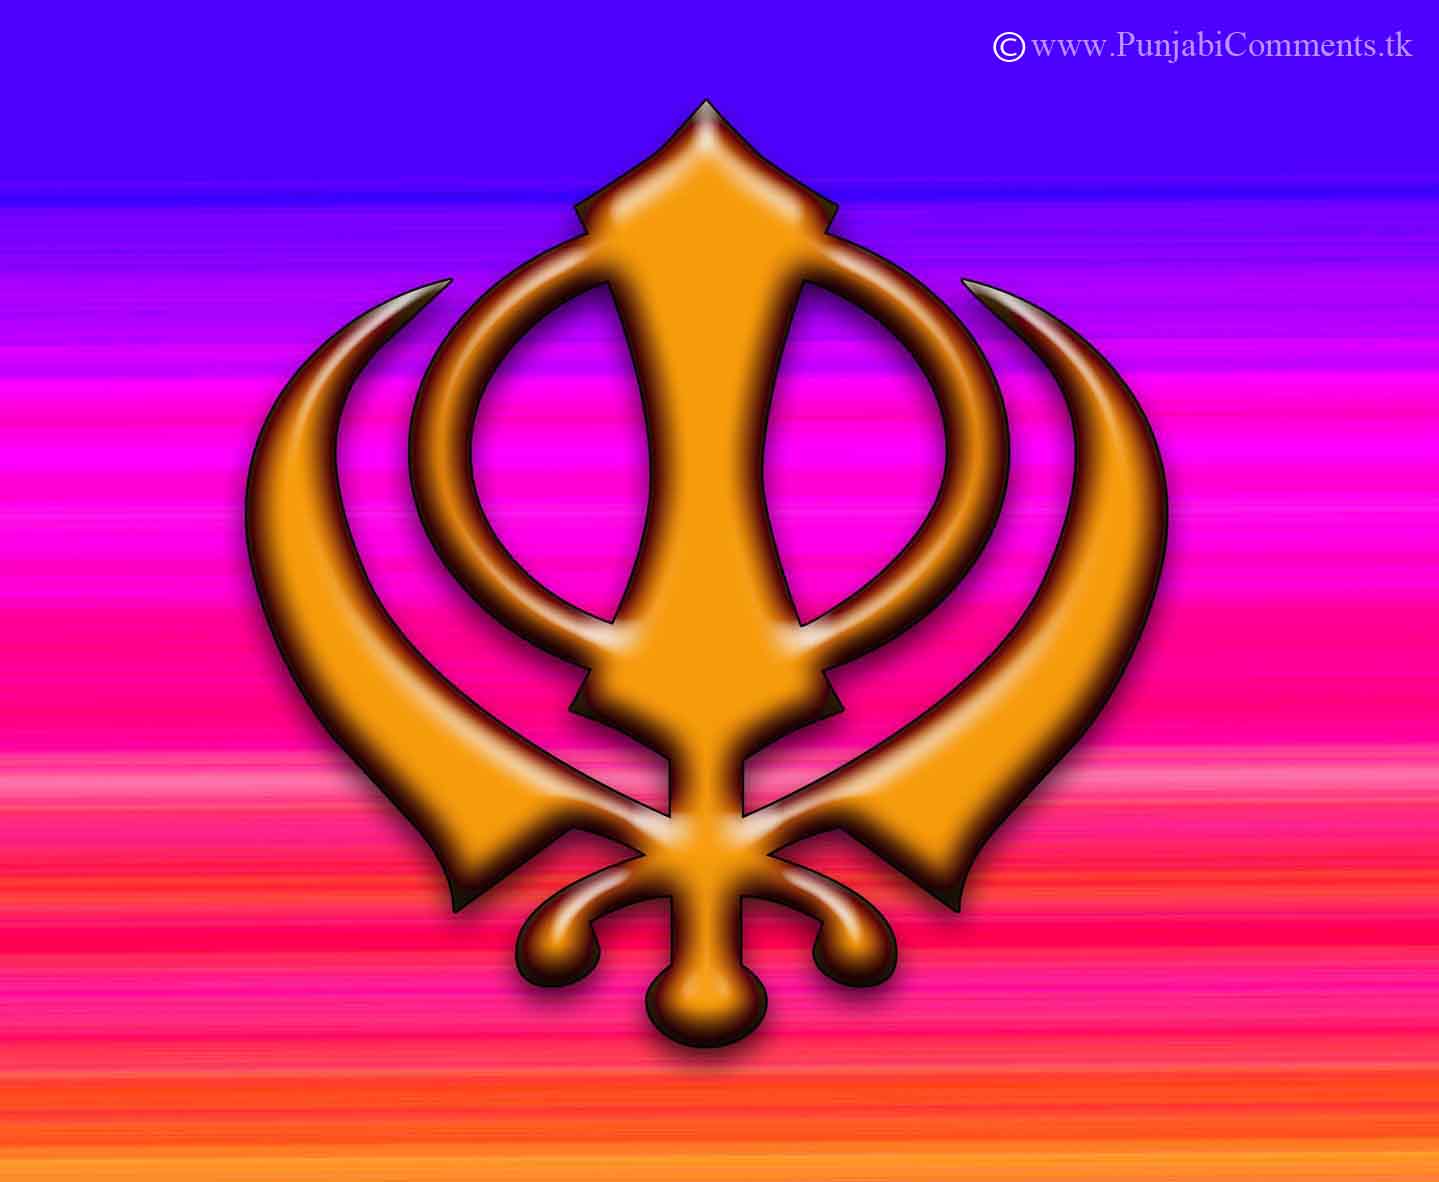 Wallpapers Pictures Photos: Free Khanda Hd Photos Images Pictures